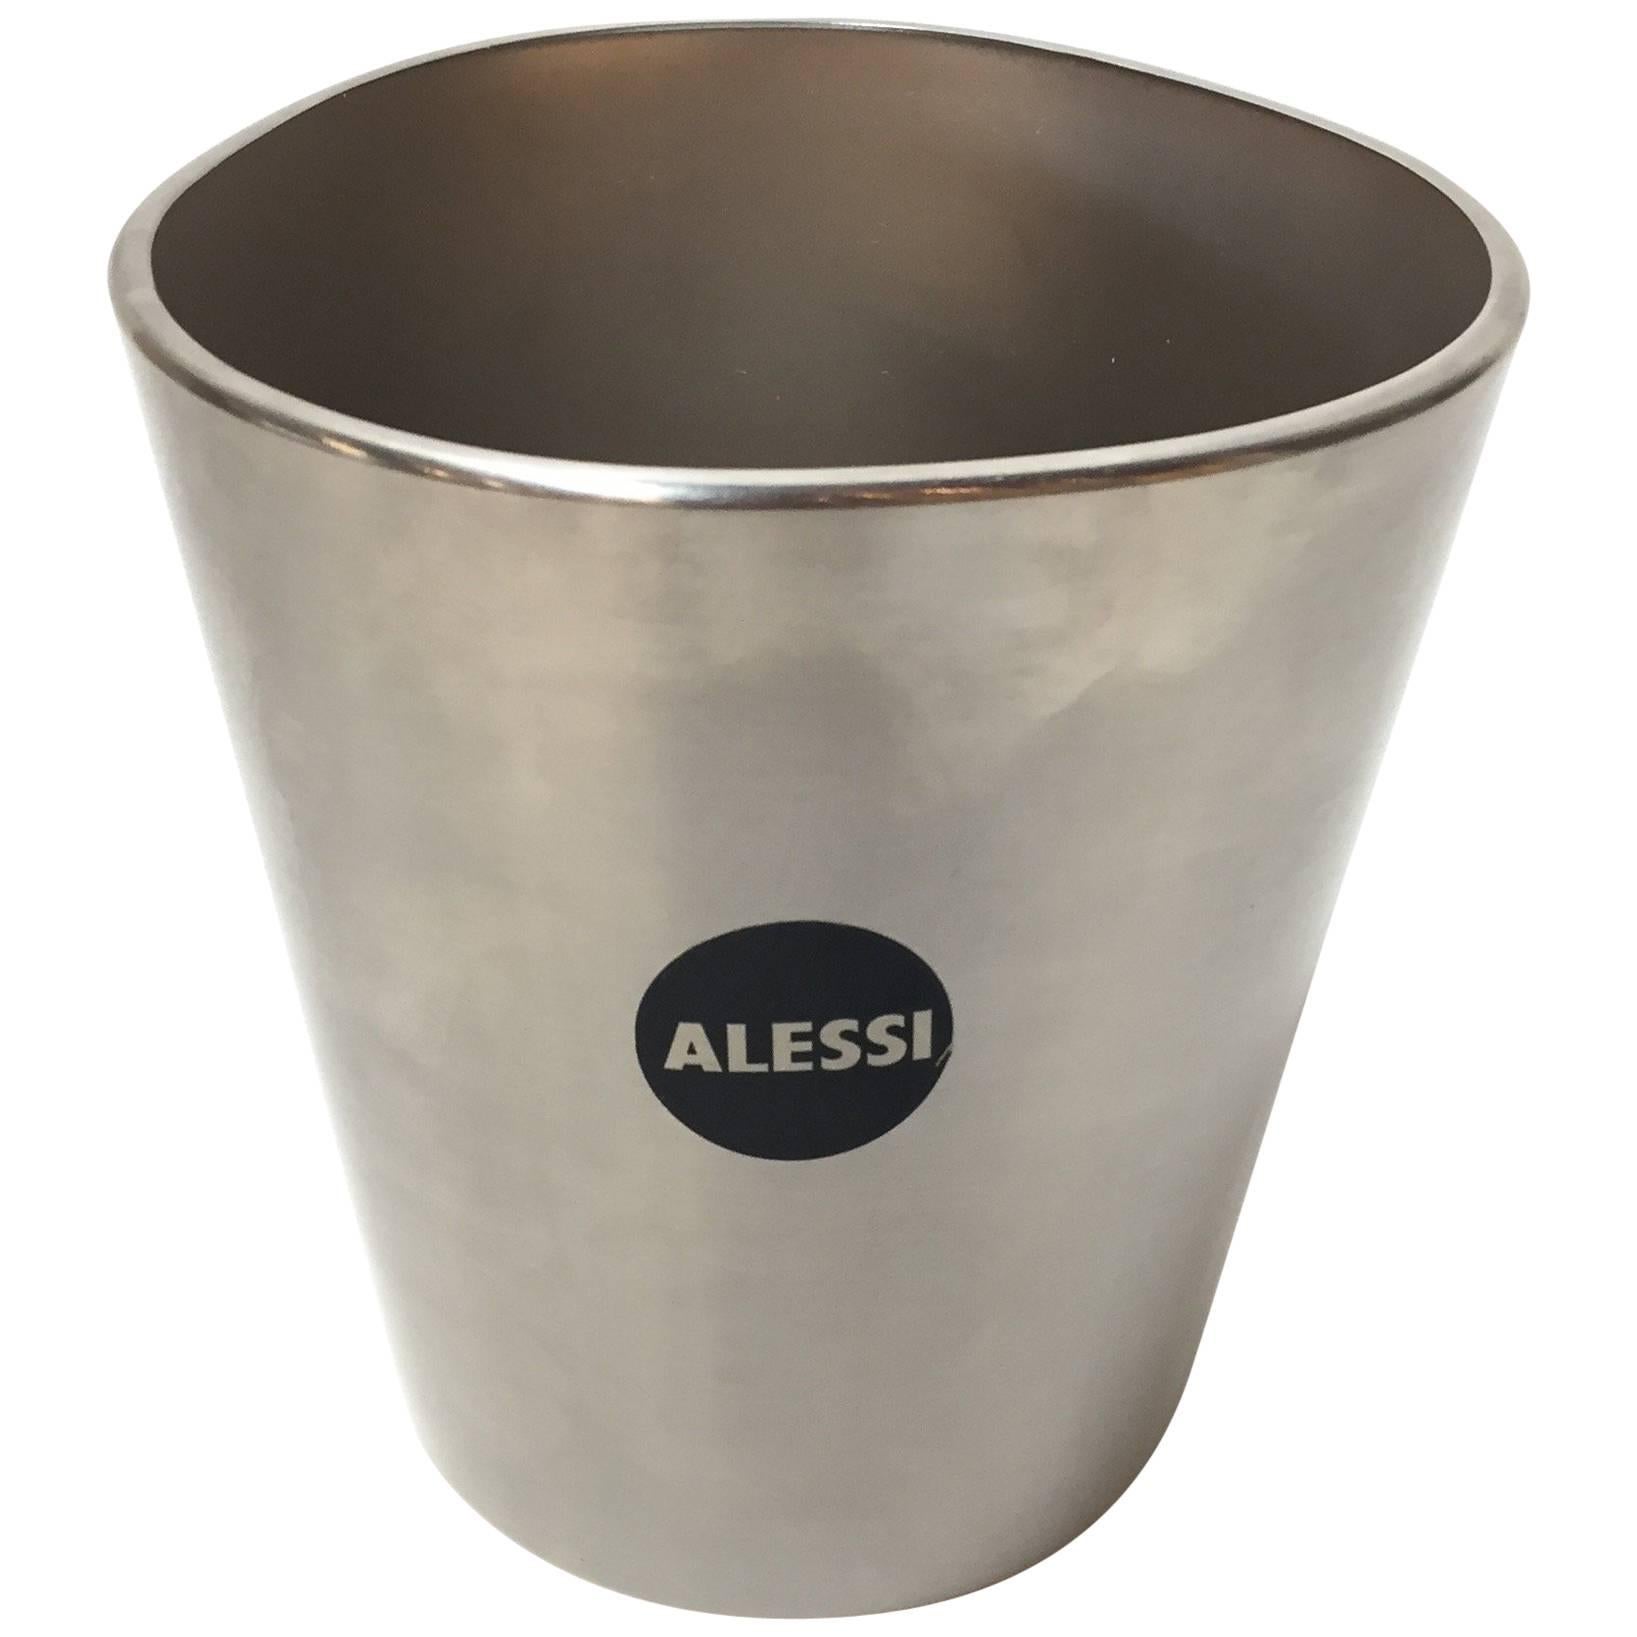 "Alessi" Ice Bucket by Jasper Morrison For Sale